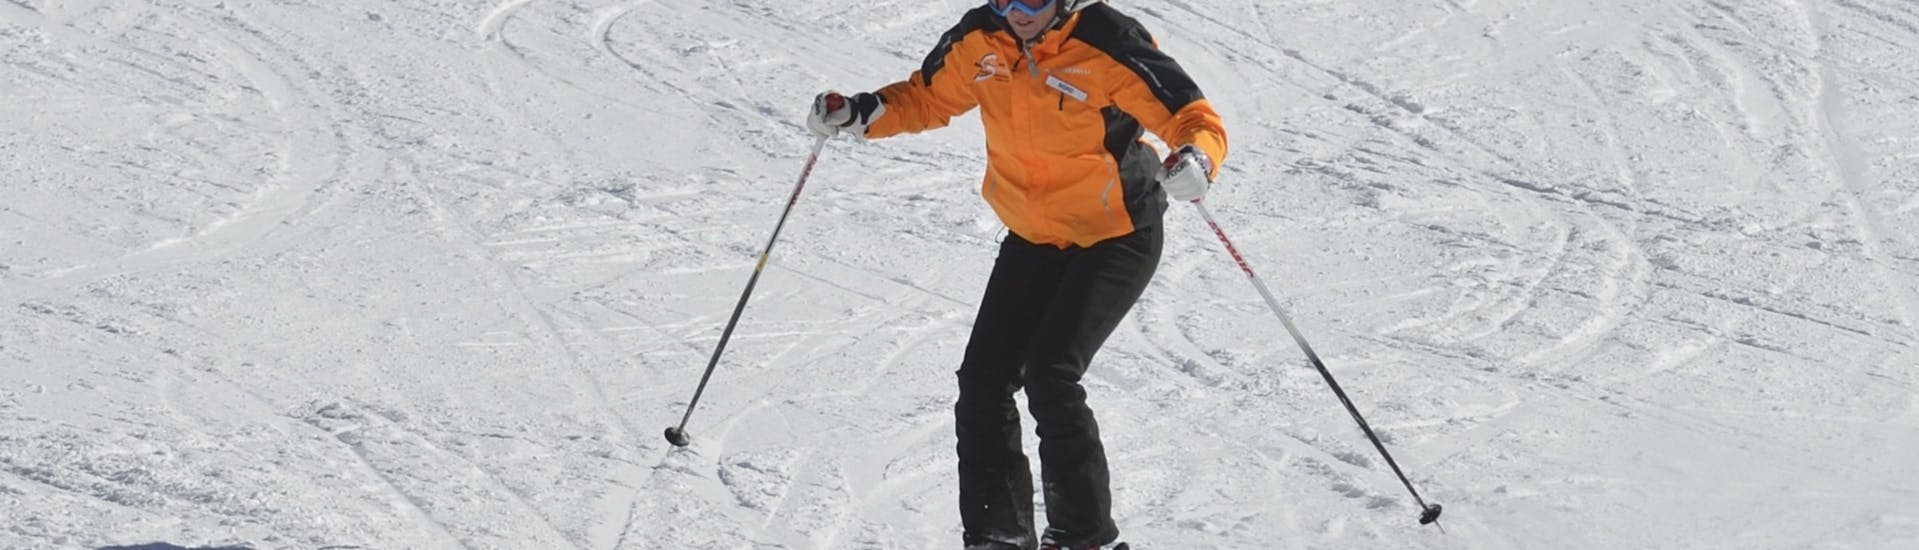 A ski beginner during their Private Ski Lessons for Adults for First Timers.